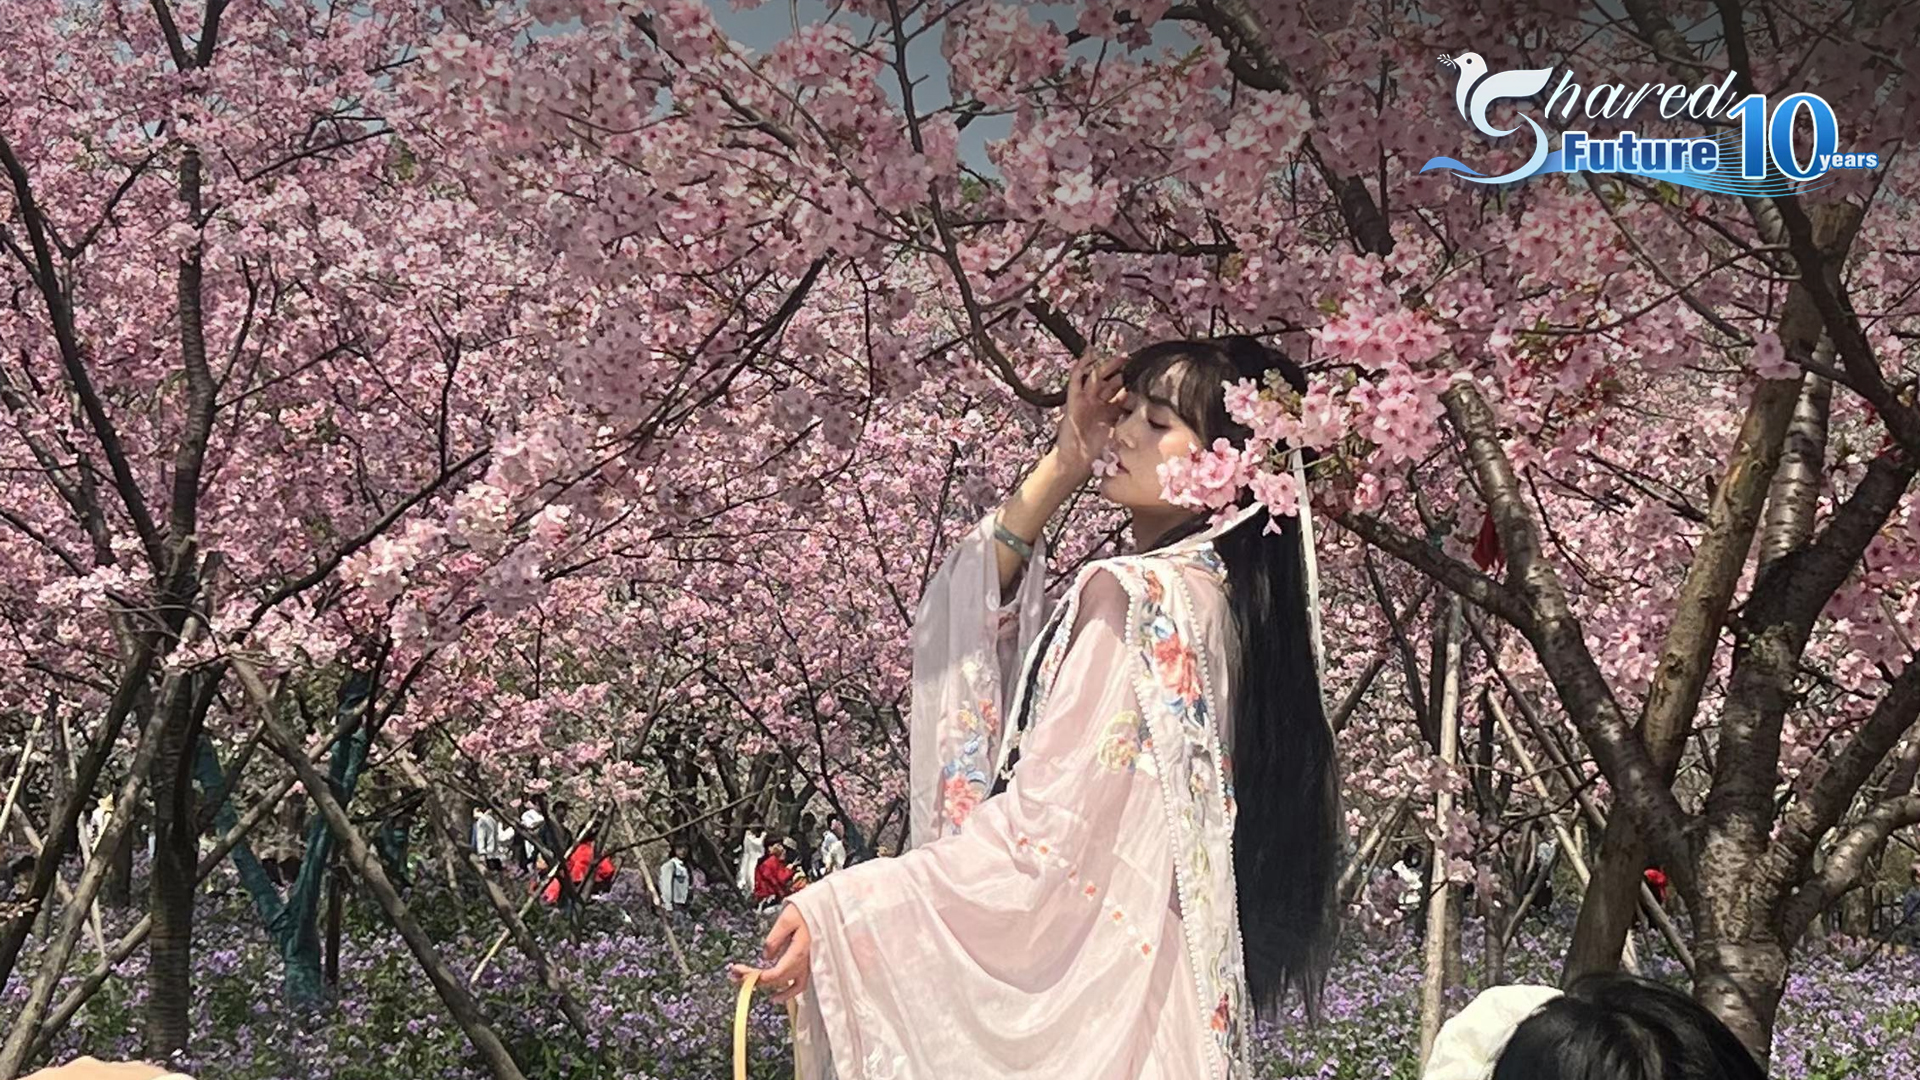 Live: Soaking in cherry blossoms in central China's Wuhan 